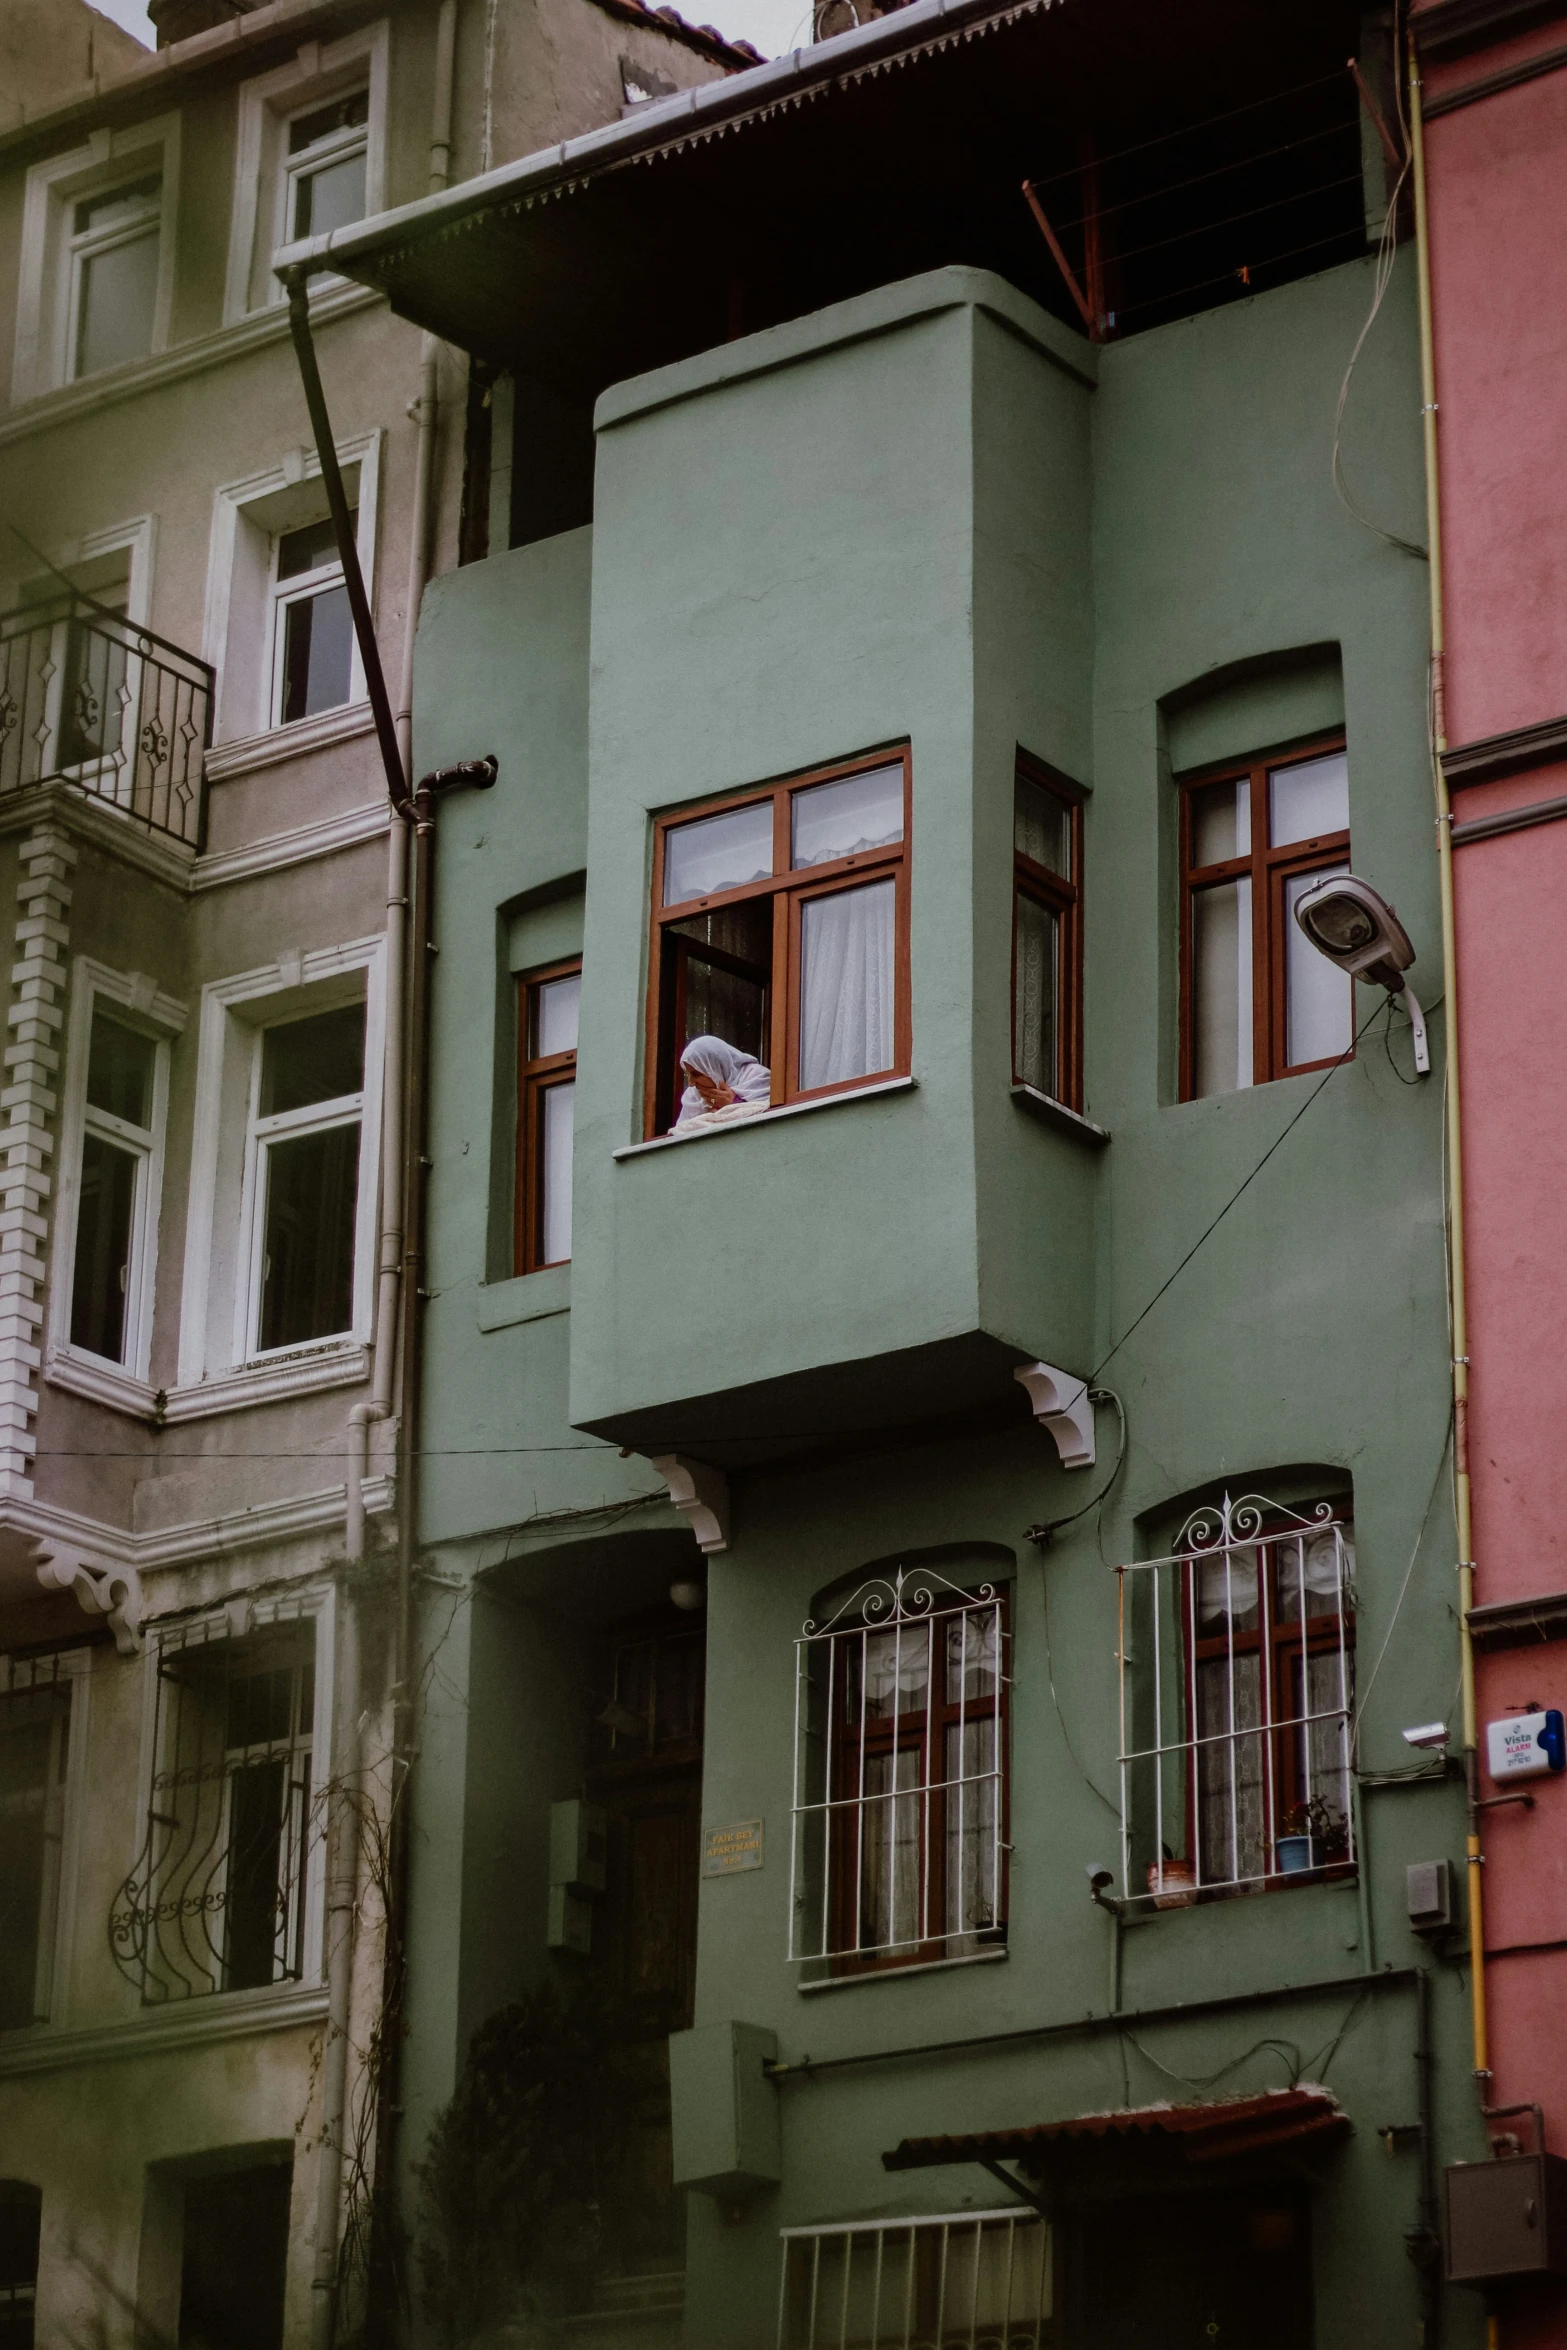 green building with two levels and two people looking out from windows